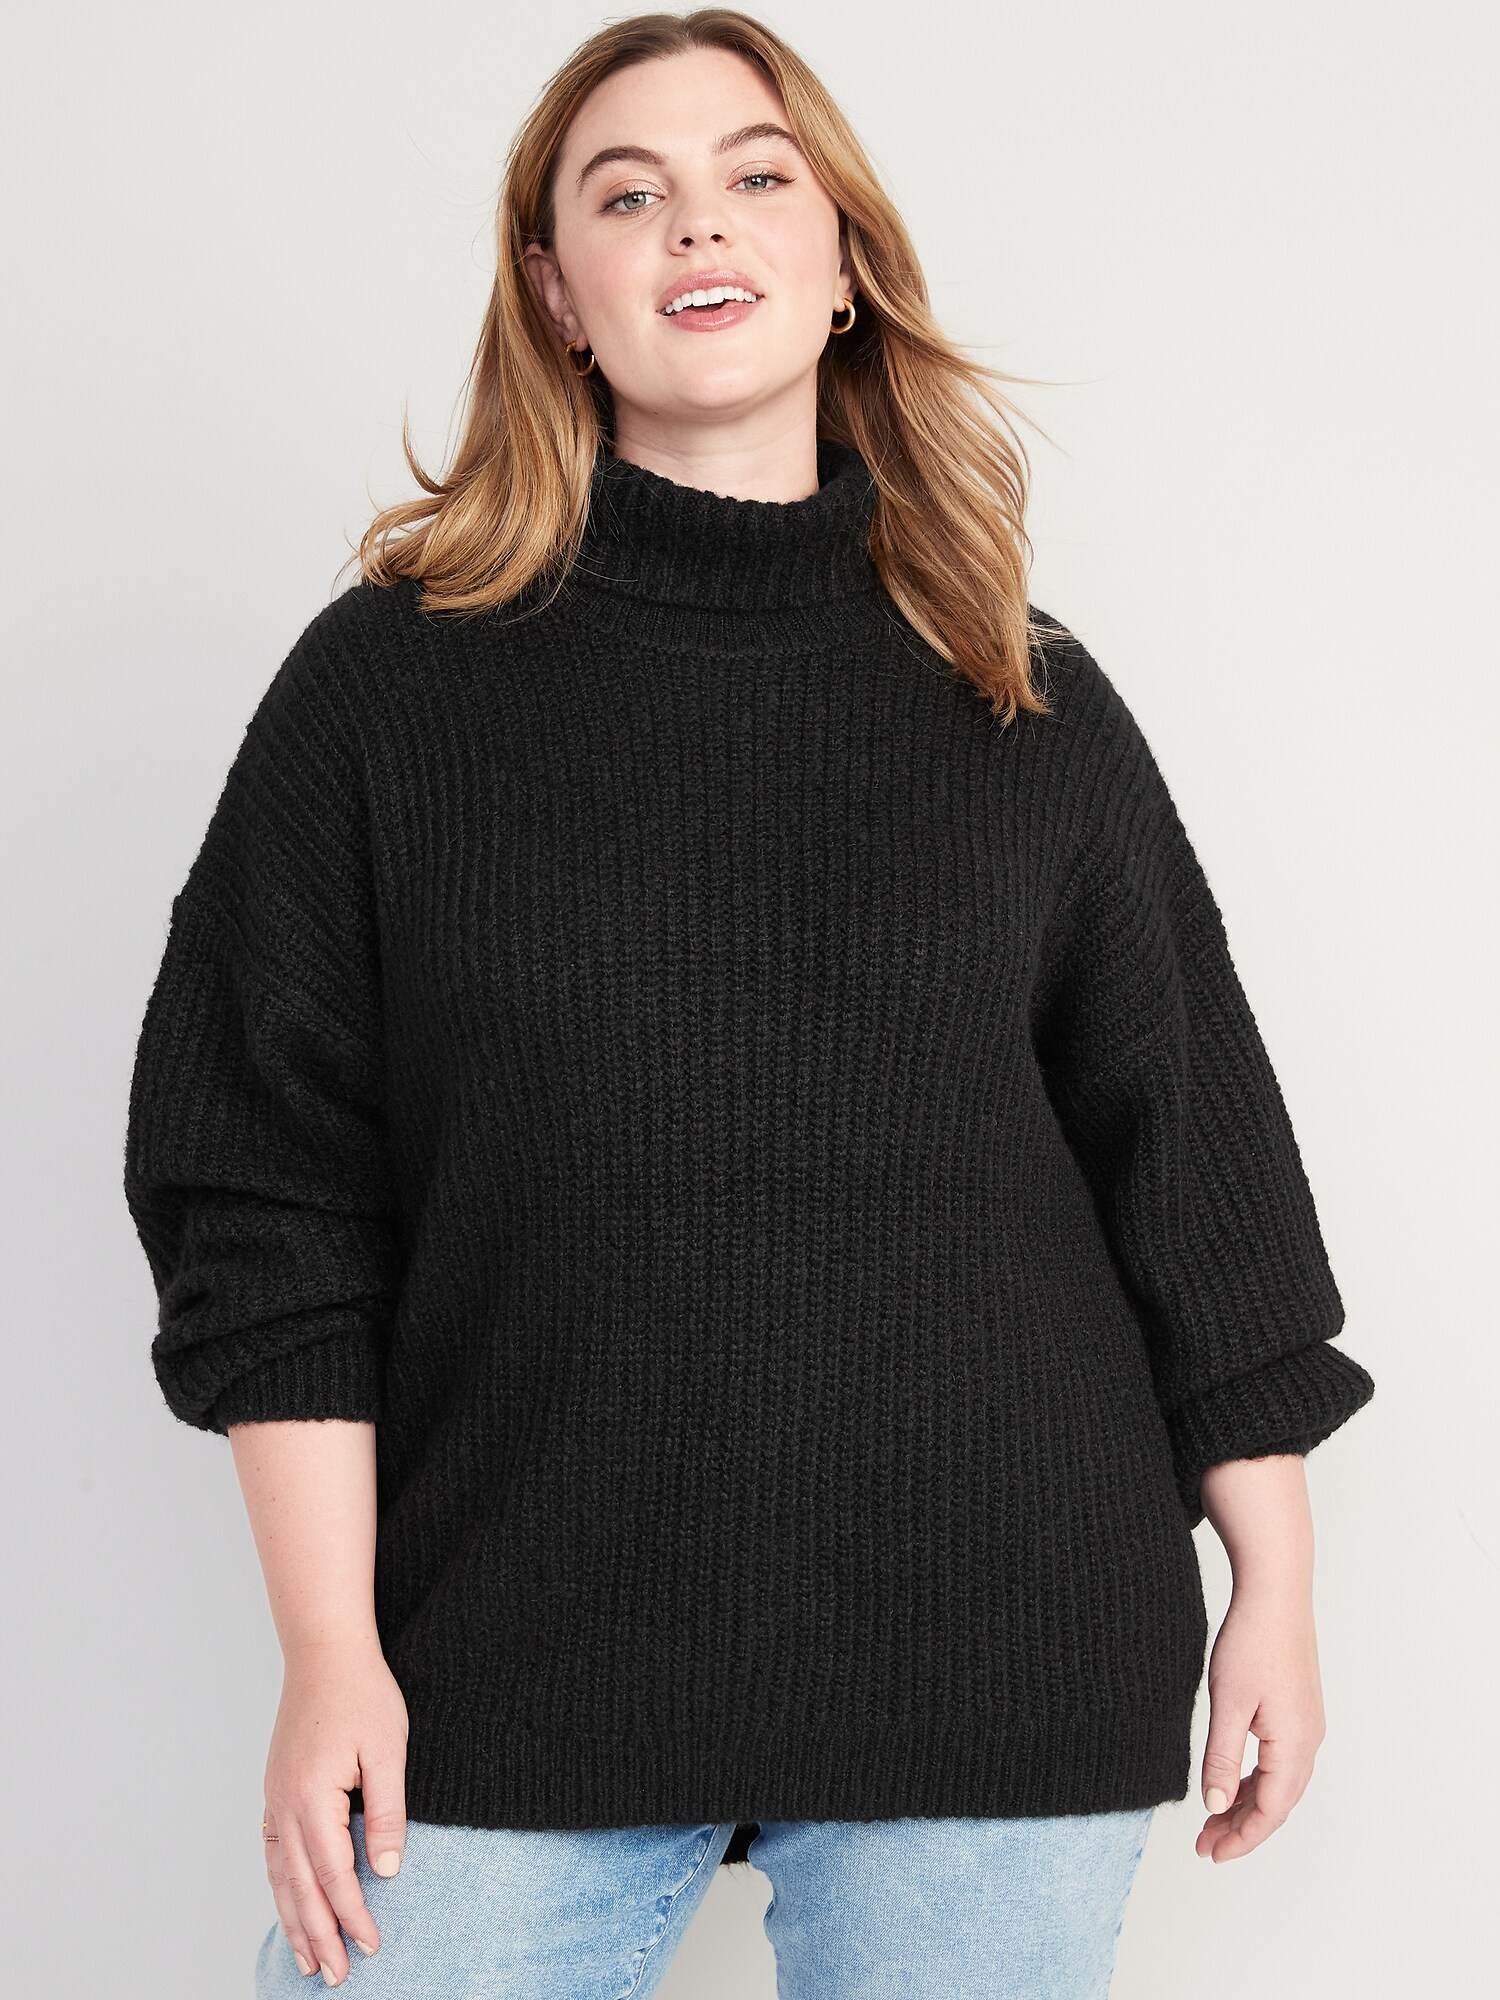 Shaker-Stitch Tunic-Length Turtleneck Sweater for Women | Old Navy